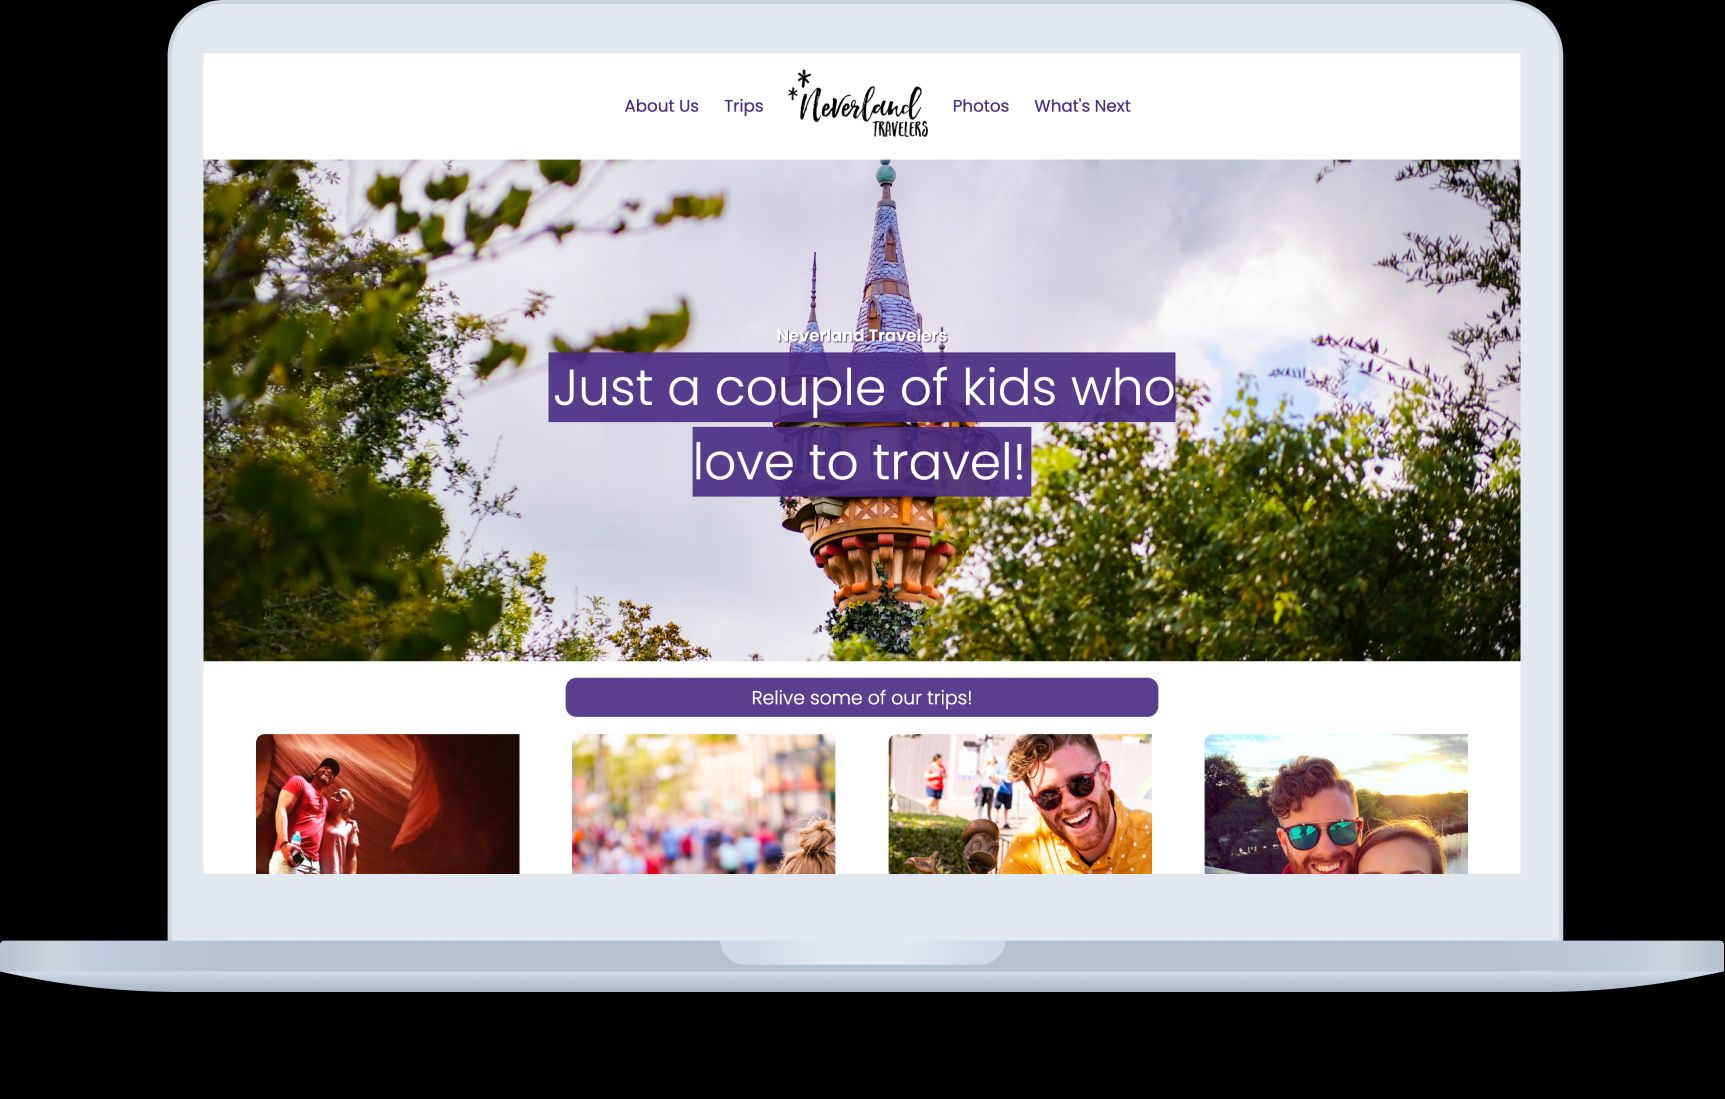 Neverland Travelers homepage, with a navigation menu, an image of a castle in Walt Disney World and several images of the Neverland Travelers